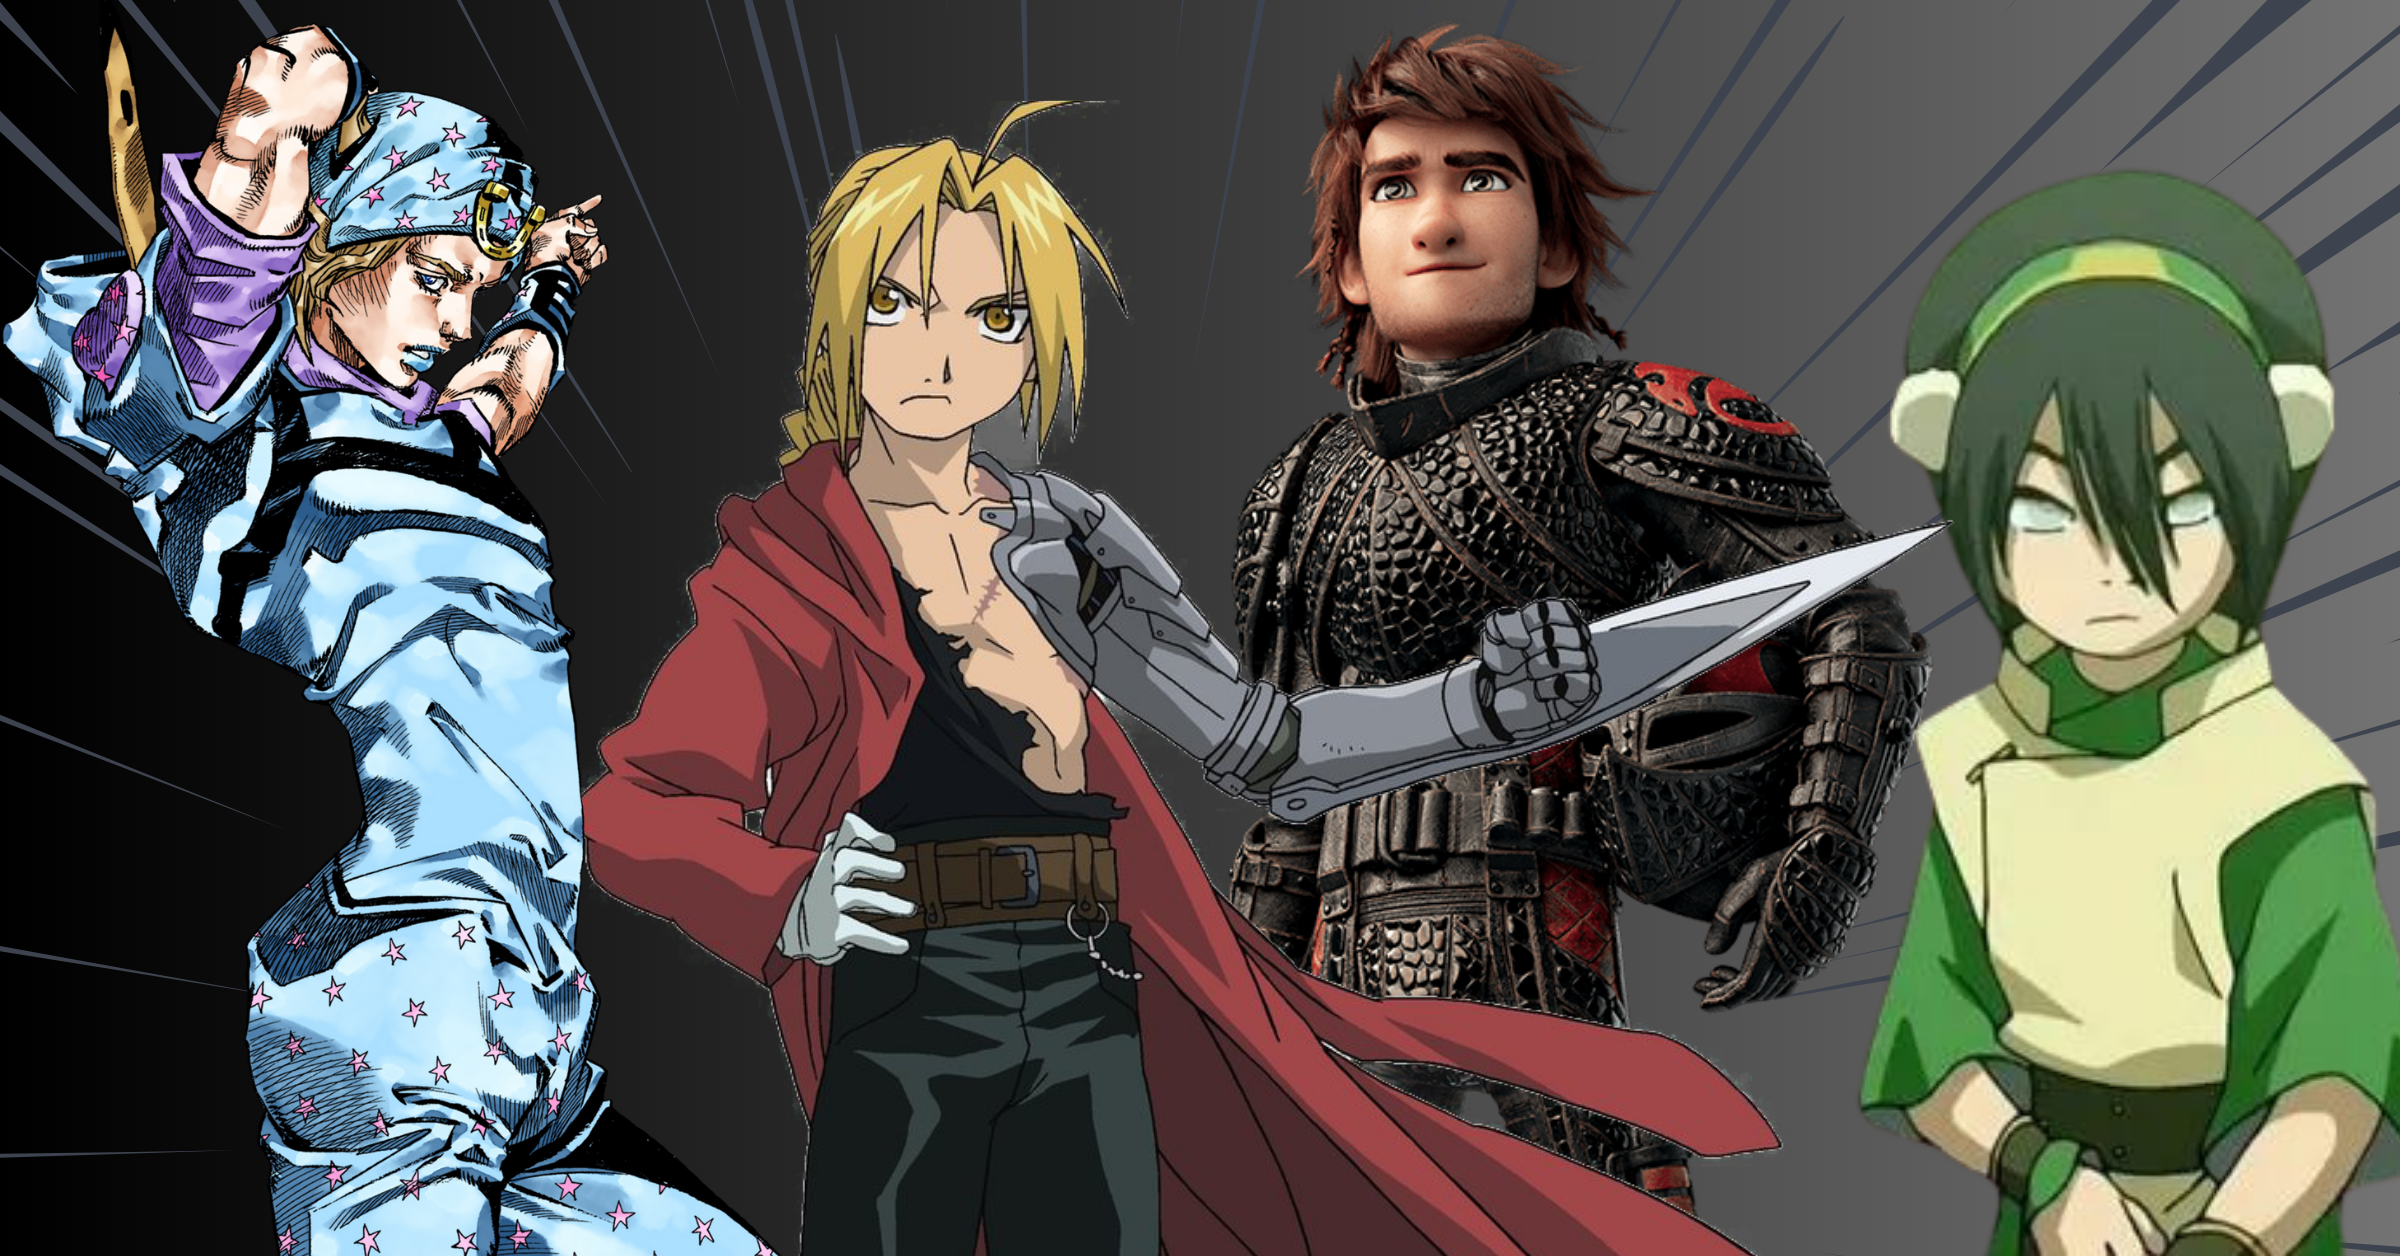 Four characters from various animated TV shows and films are standing against a black and grey backdrop. Johnny Joestar, the character on the left is wearing dark blue and black clothing and has brown hair. The character next to him, Edward Elric, has a metal arm with a sword attached to it and is wearing a red cape. Beside him is Hiccup from How To Train Your Dragon wearing red and black armour. Toph from Avatar: The Last Airbender stands to the far right. She is wearing green clothing and has long dark hair covering part of her face.